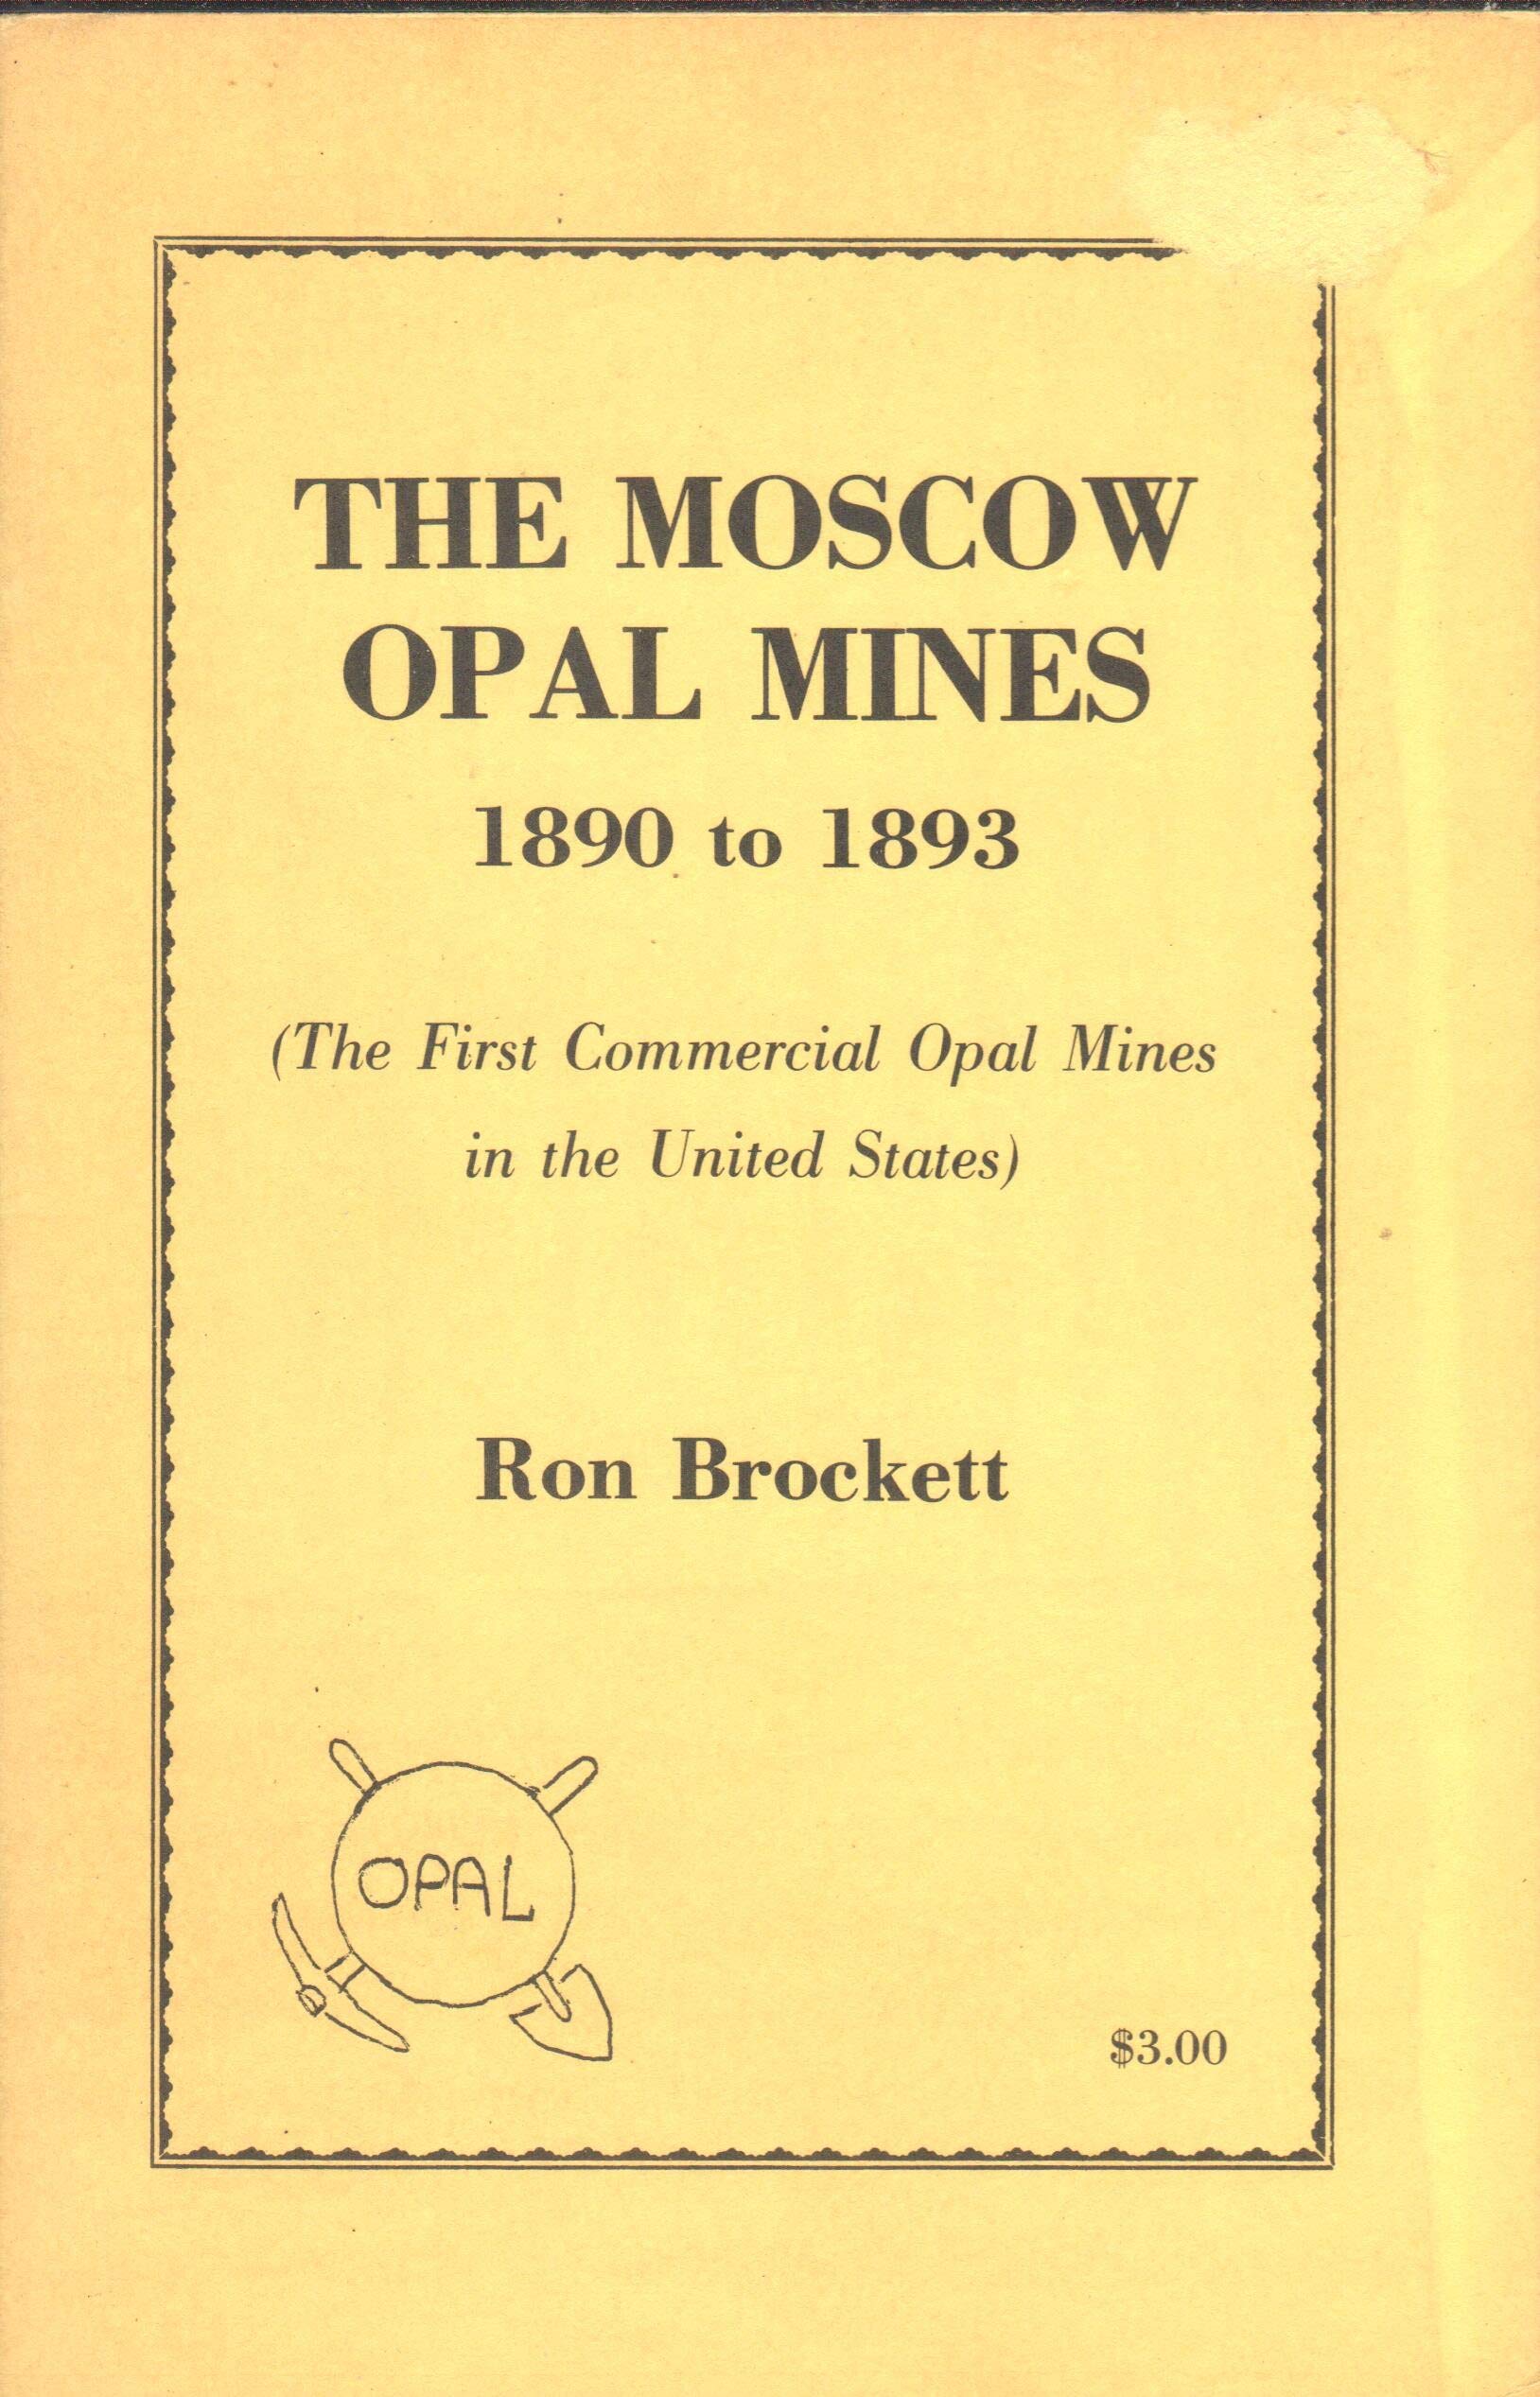 The Moscow opal mines, 1890 to 1893: The first commercial opal mines in the United States (book cover)